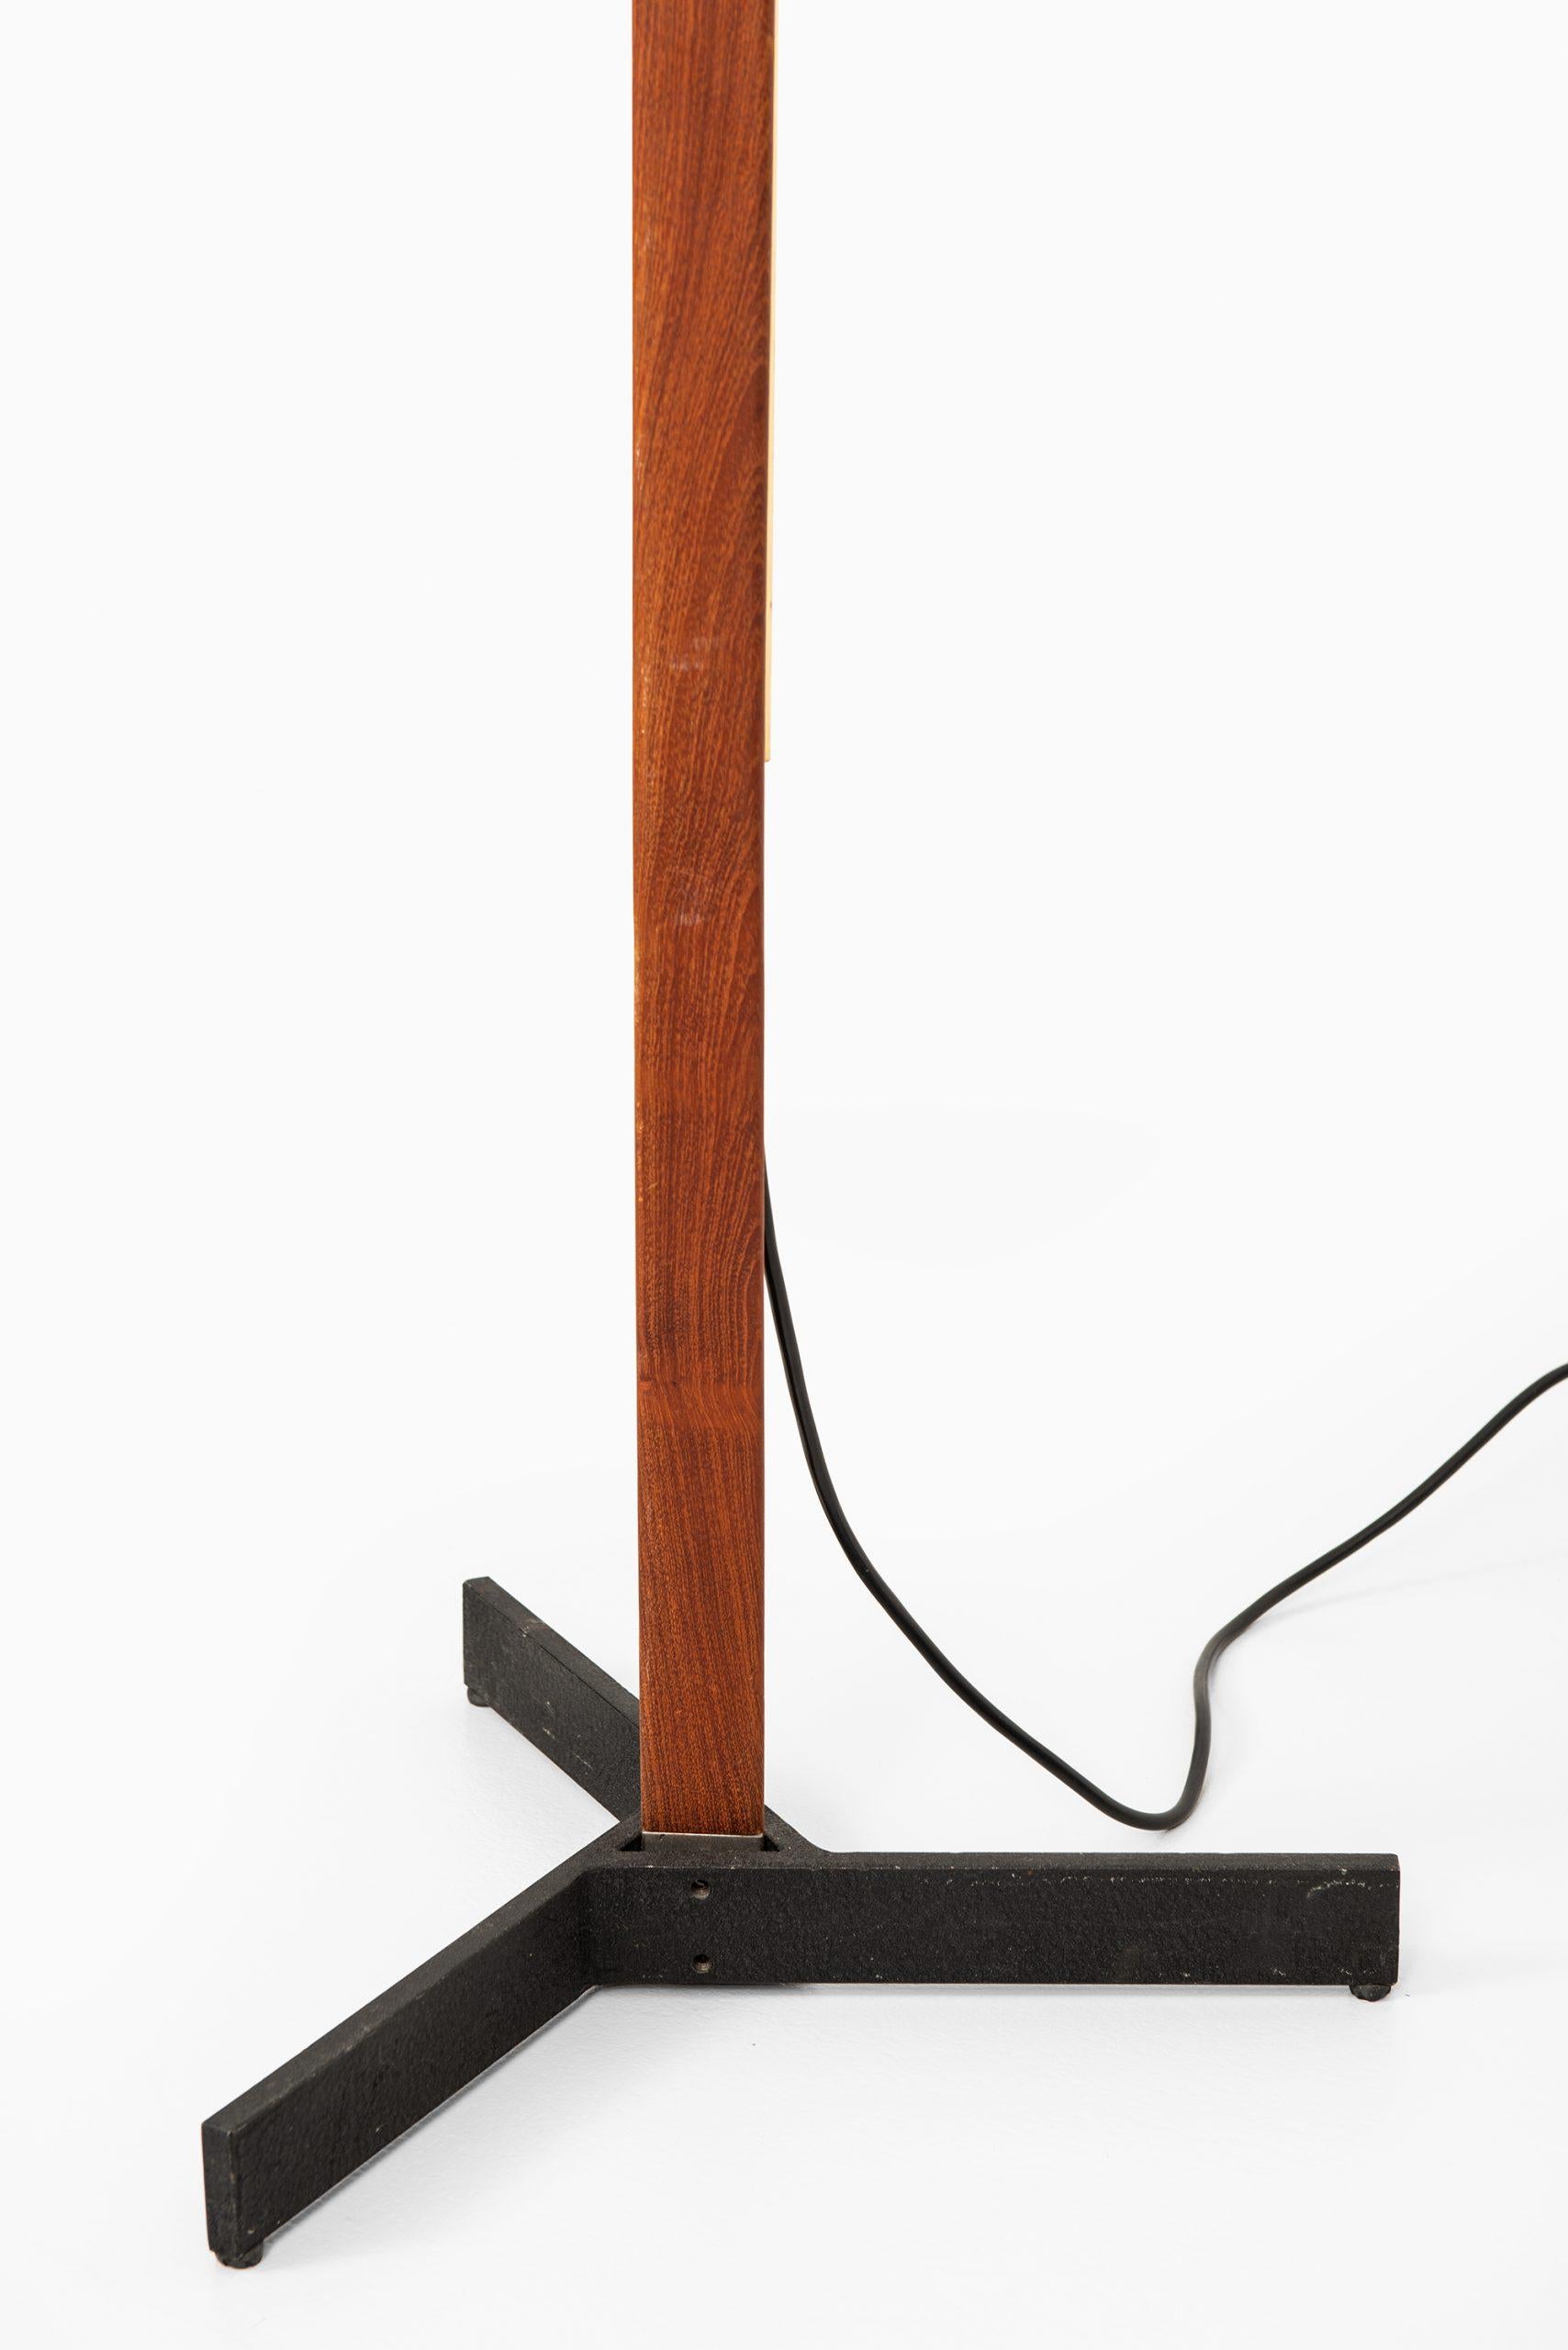 Very rare height adjustable floor lamp designed by Svend Aage Holm Sørensen. Produced by Holm Sørensen & Co in Denmark.
Size: Height 155-180 cm.
Please note: This floor lamp will be sold without any lamp shade.